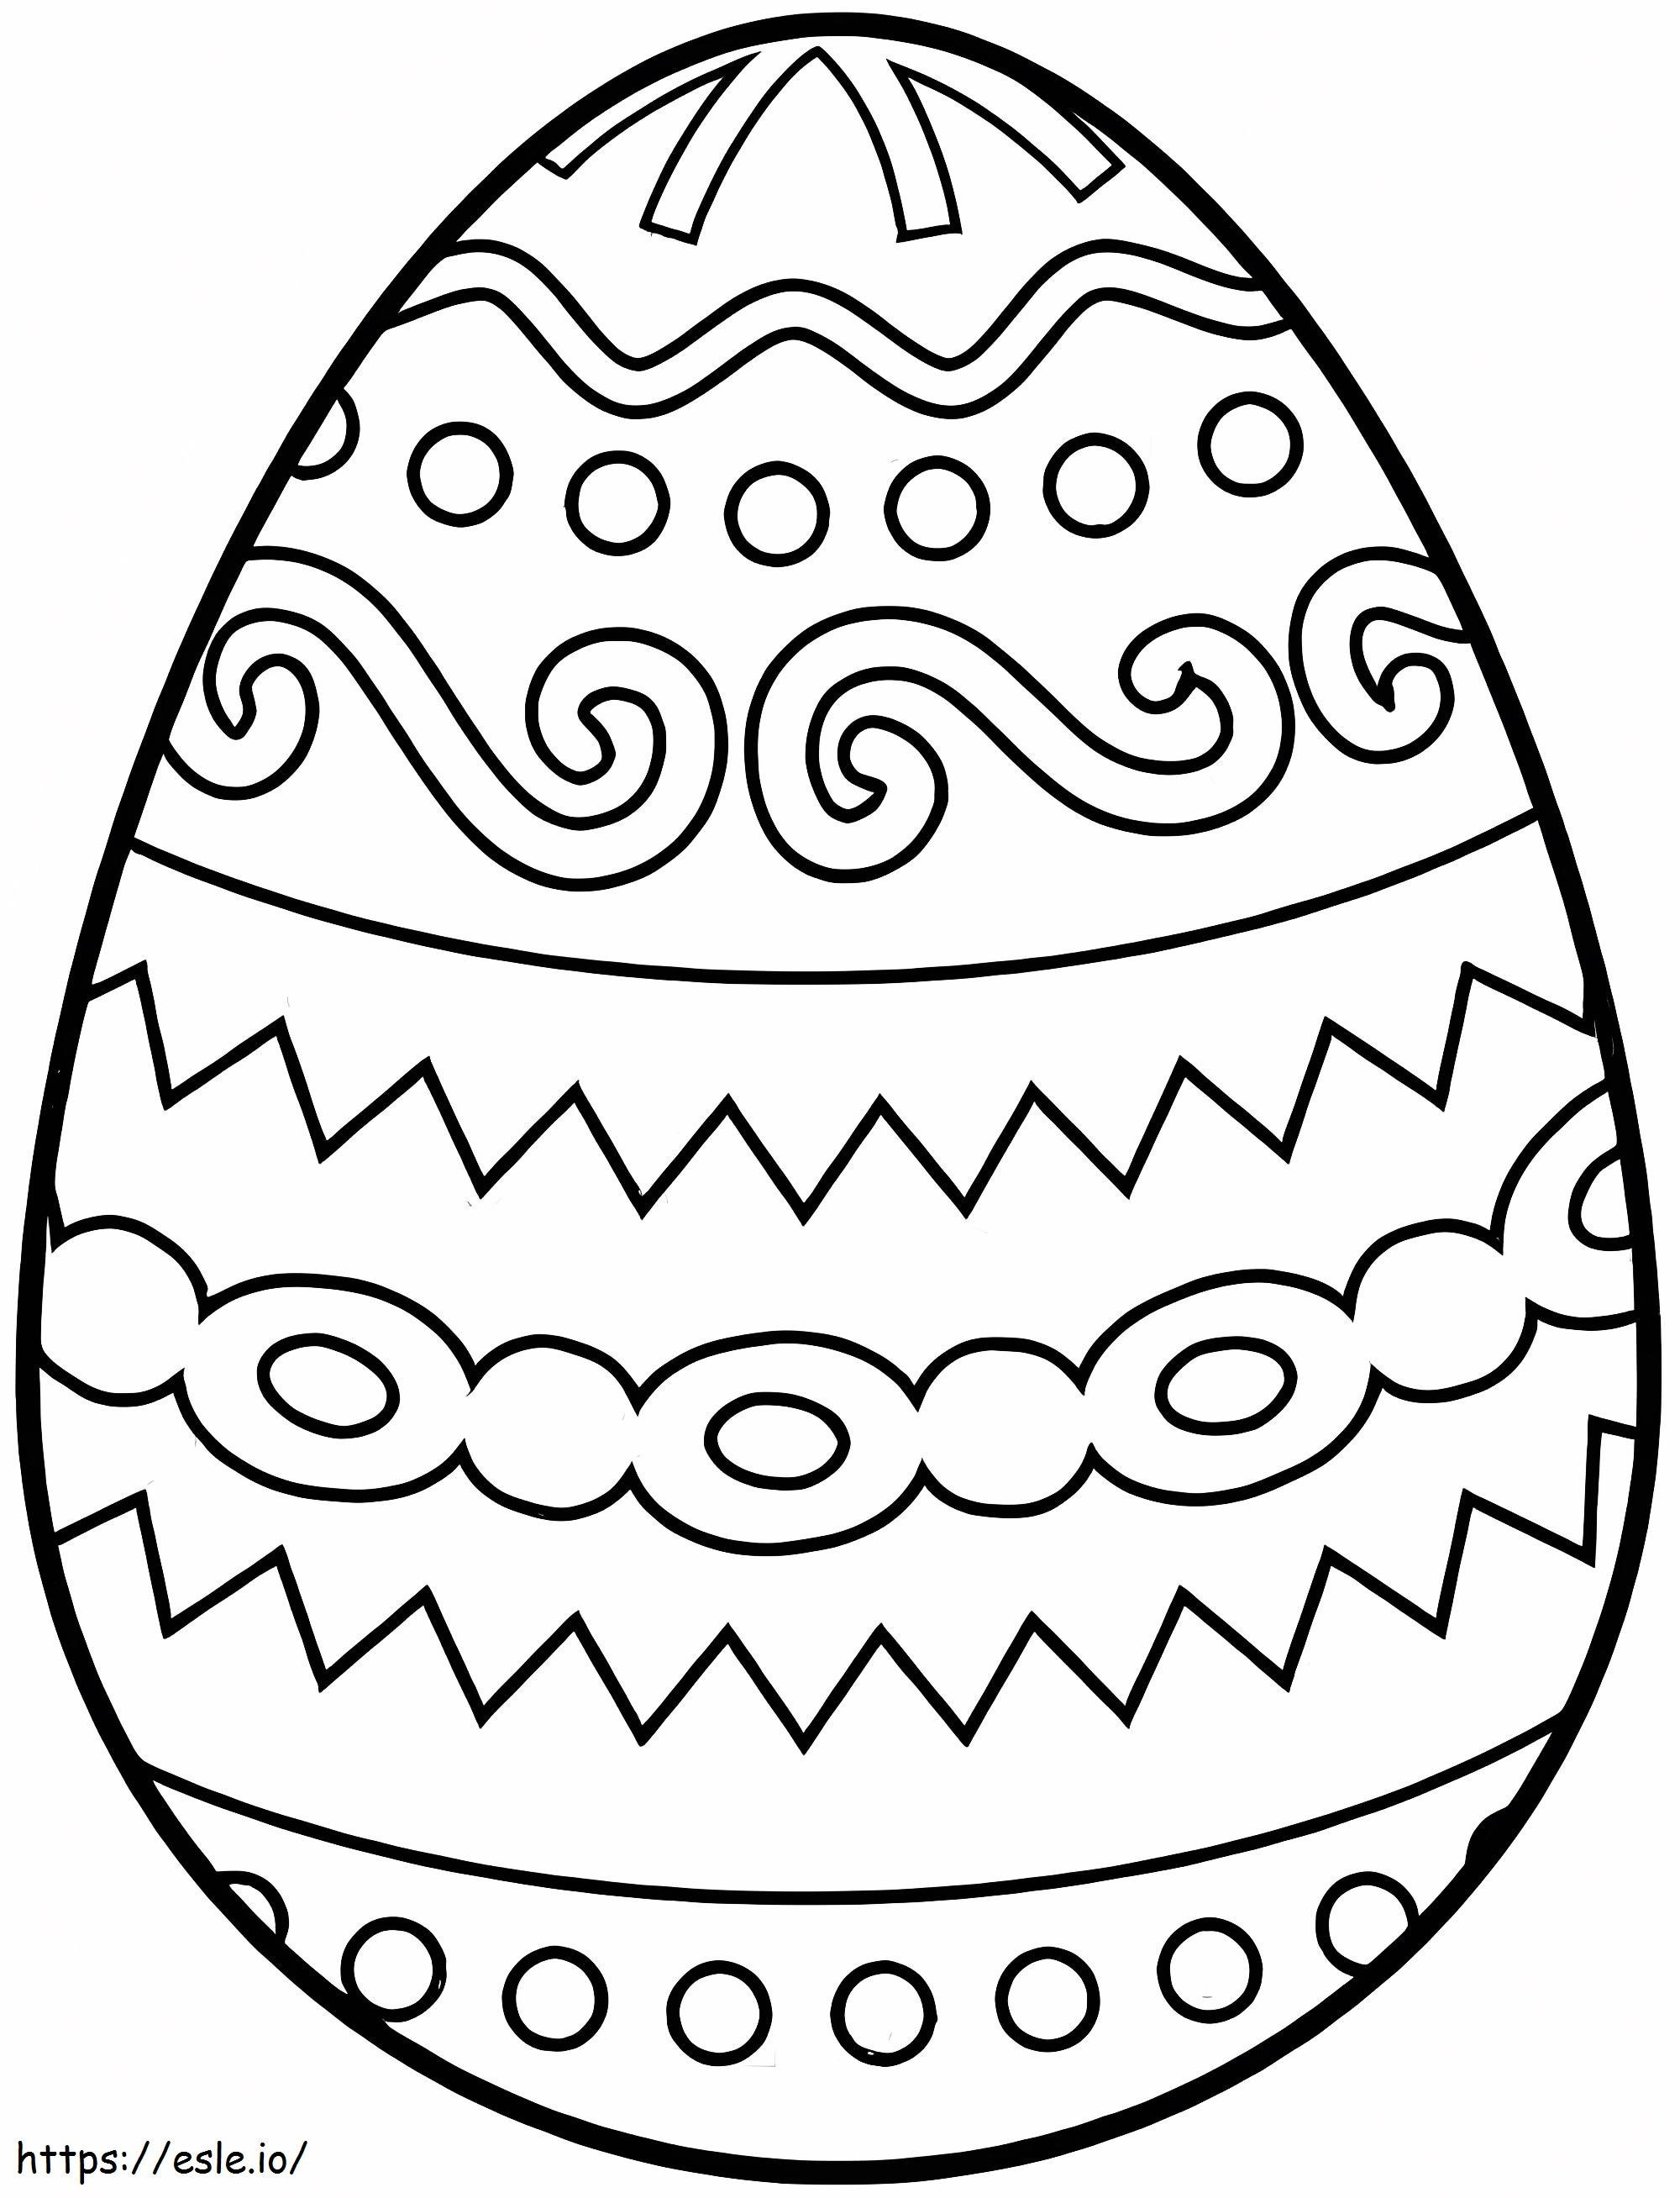 Basic Easter Egg coloring page